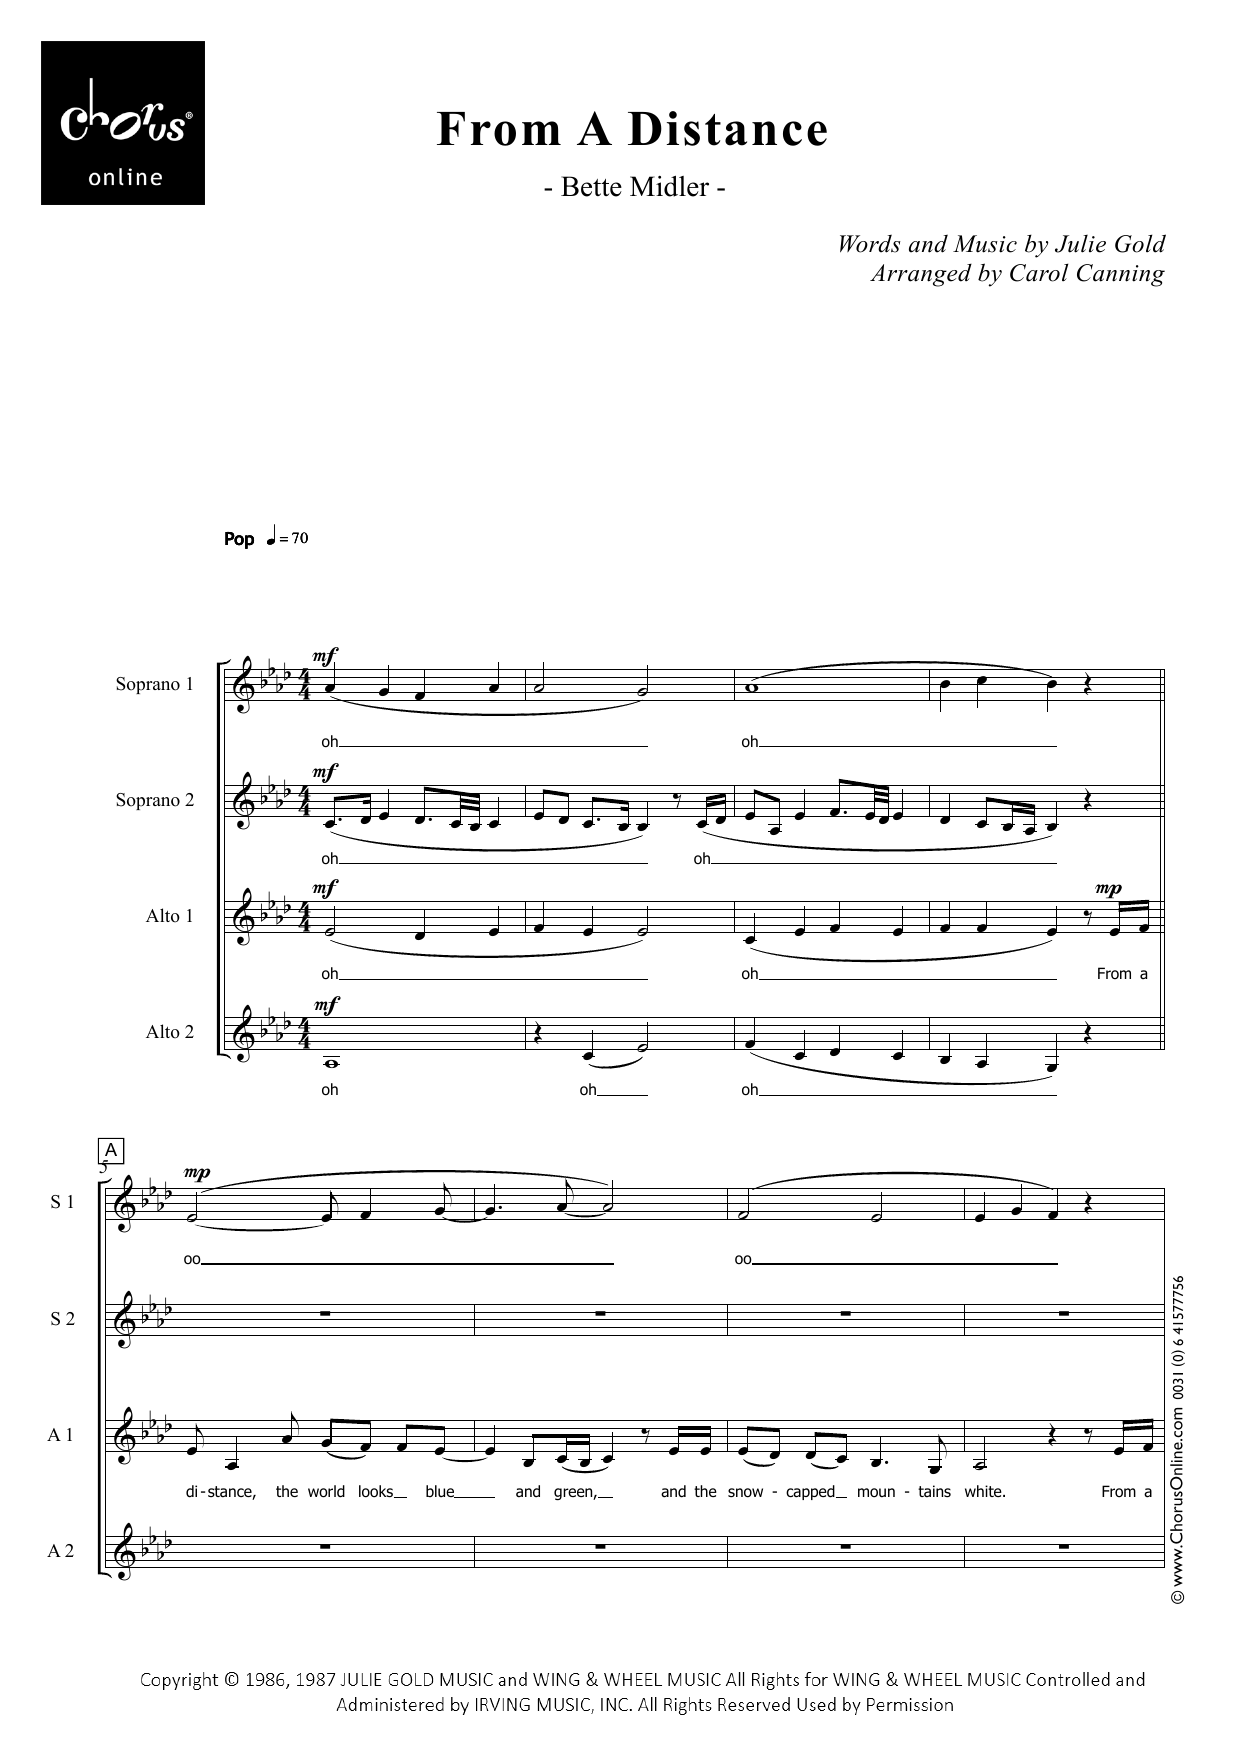 Bette Midler From A Distance (arr. Carol Canning) sheet music notes printable PDF score